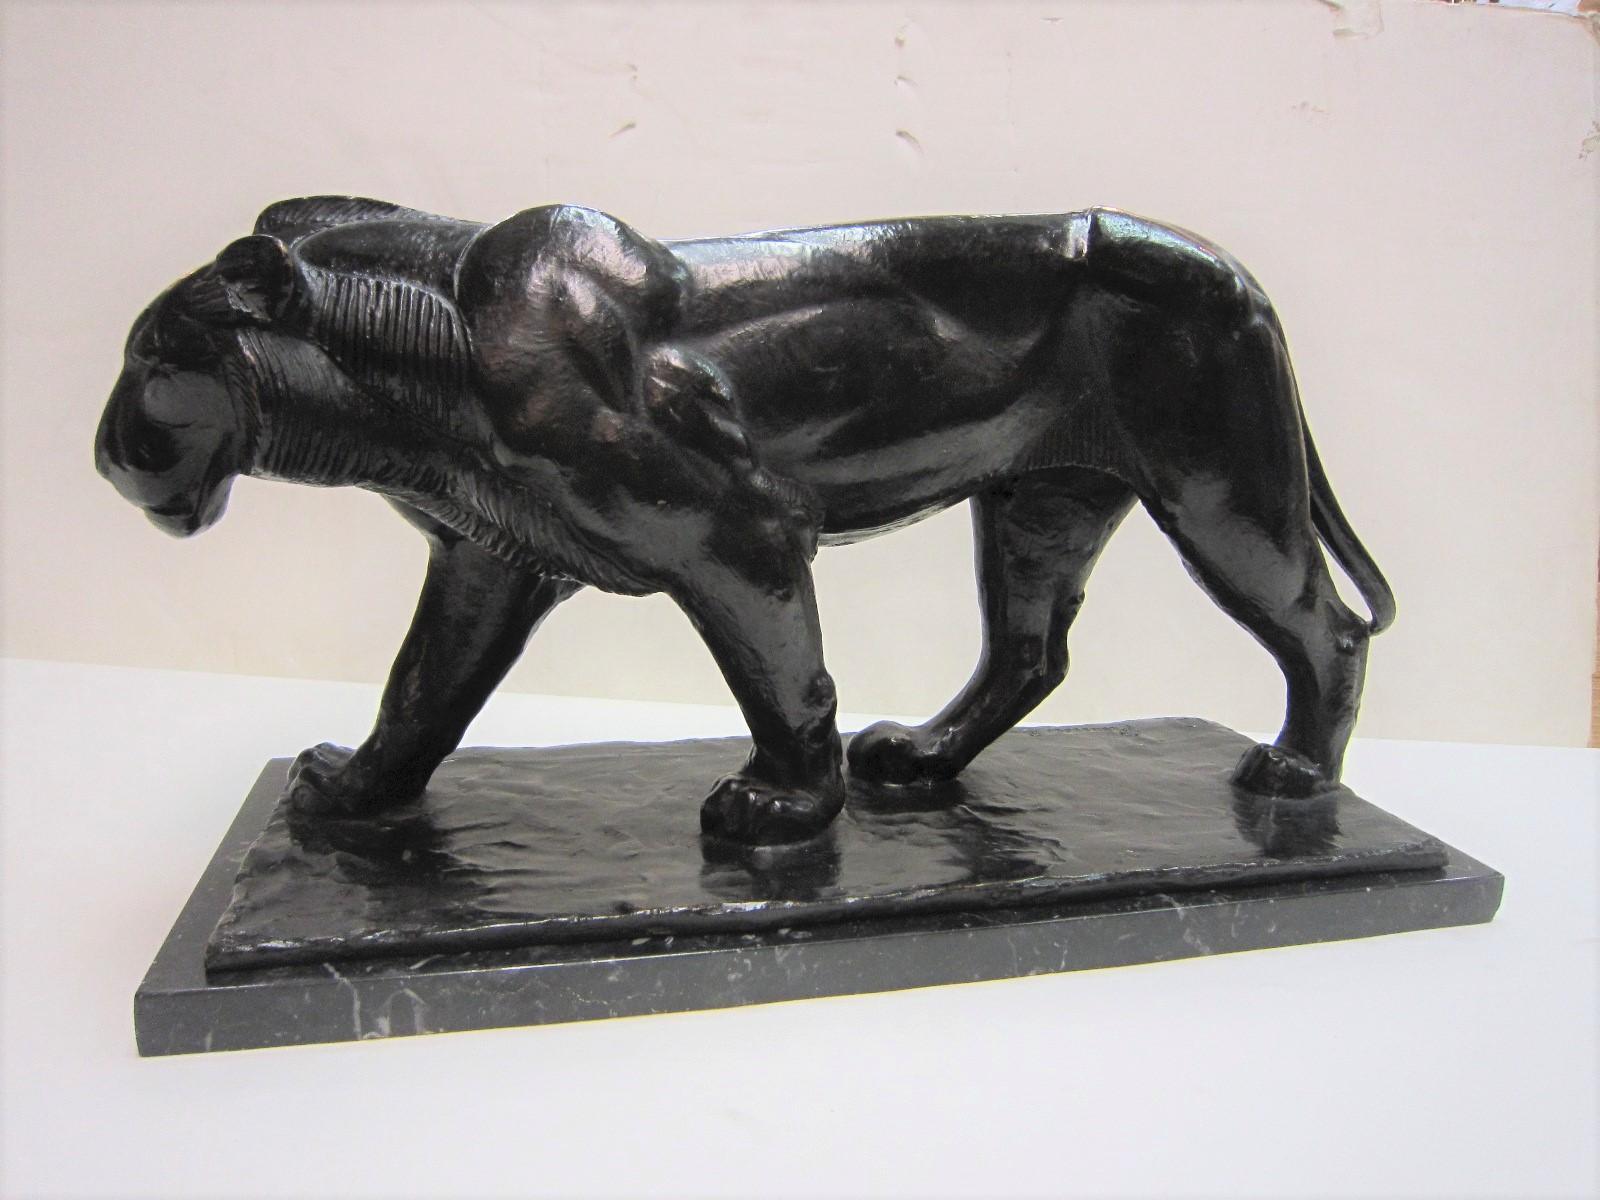 A rare and important French/ Italian Art Deco period bronze sculpture of a walking panther in original dark brown/ black patina. This exquisite cast, sculpted with highly stylized anatomical details is signed by the artist Piero Palazzolo, Paris and